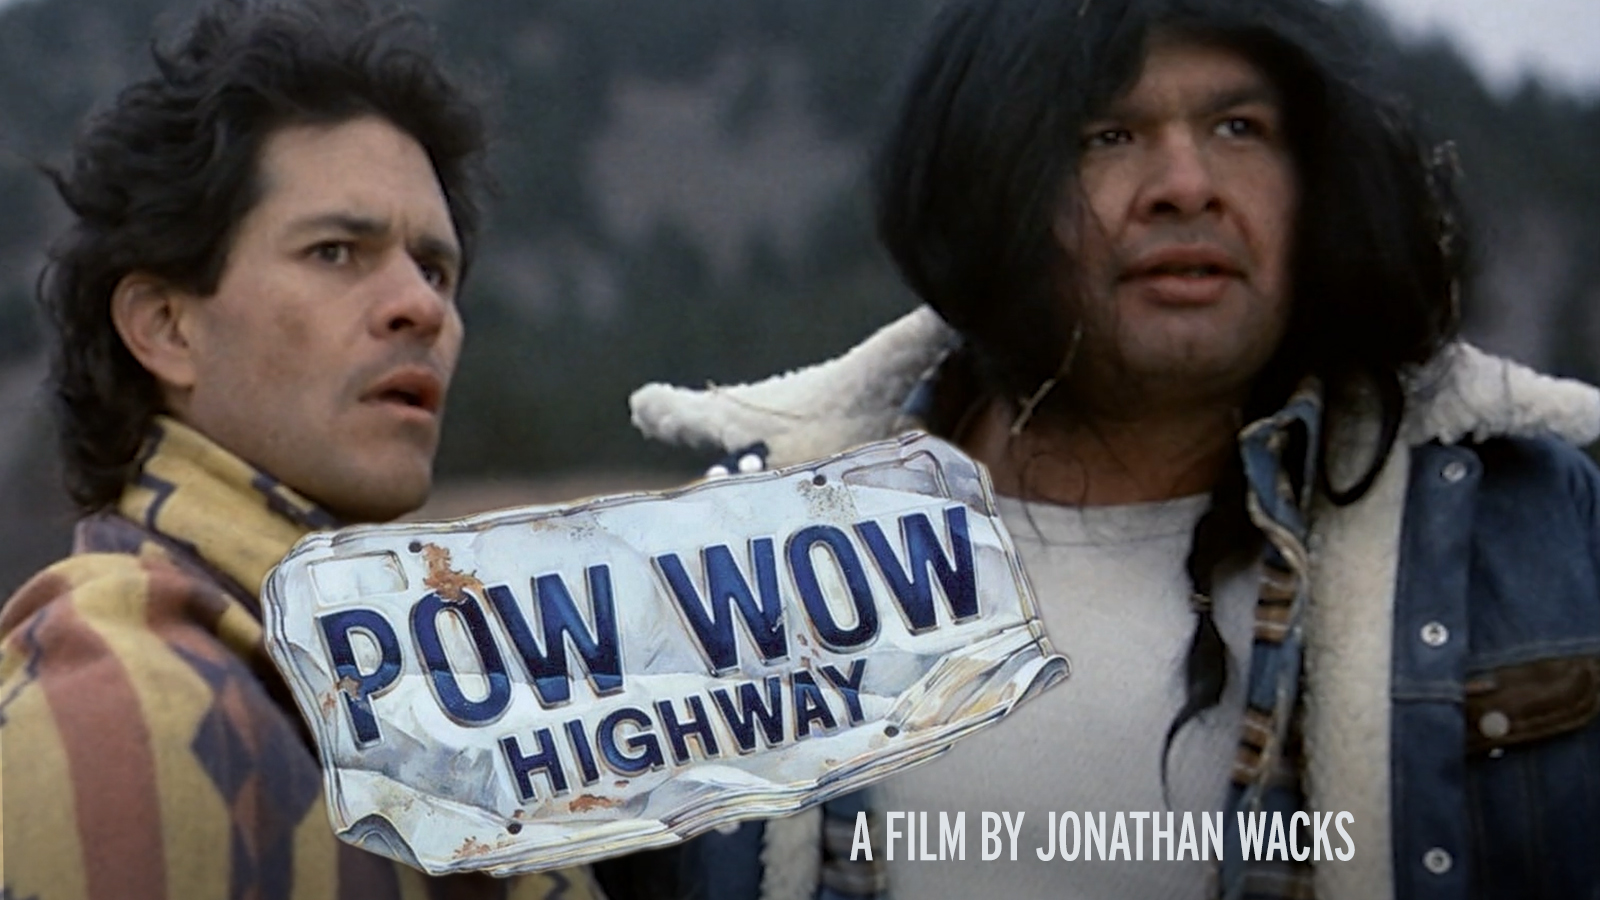 Powwow Highway - The Criterion Channel